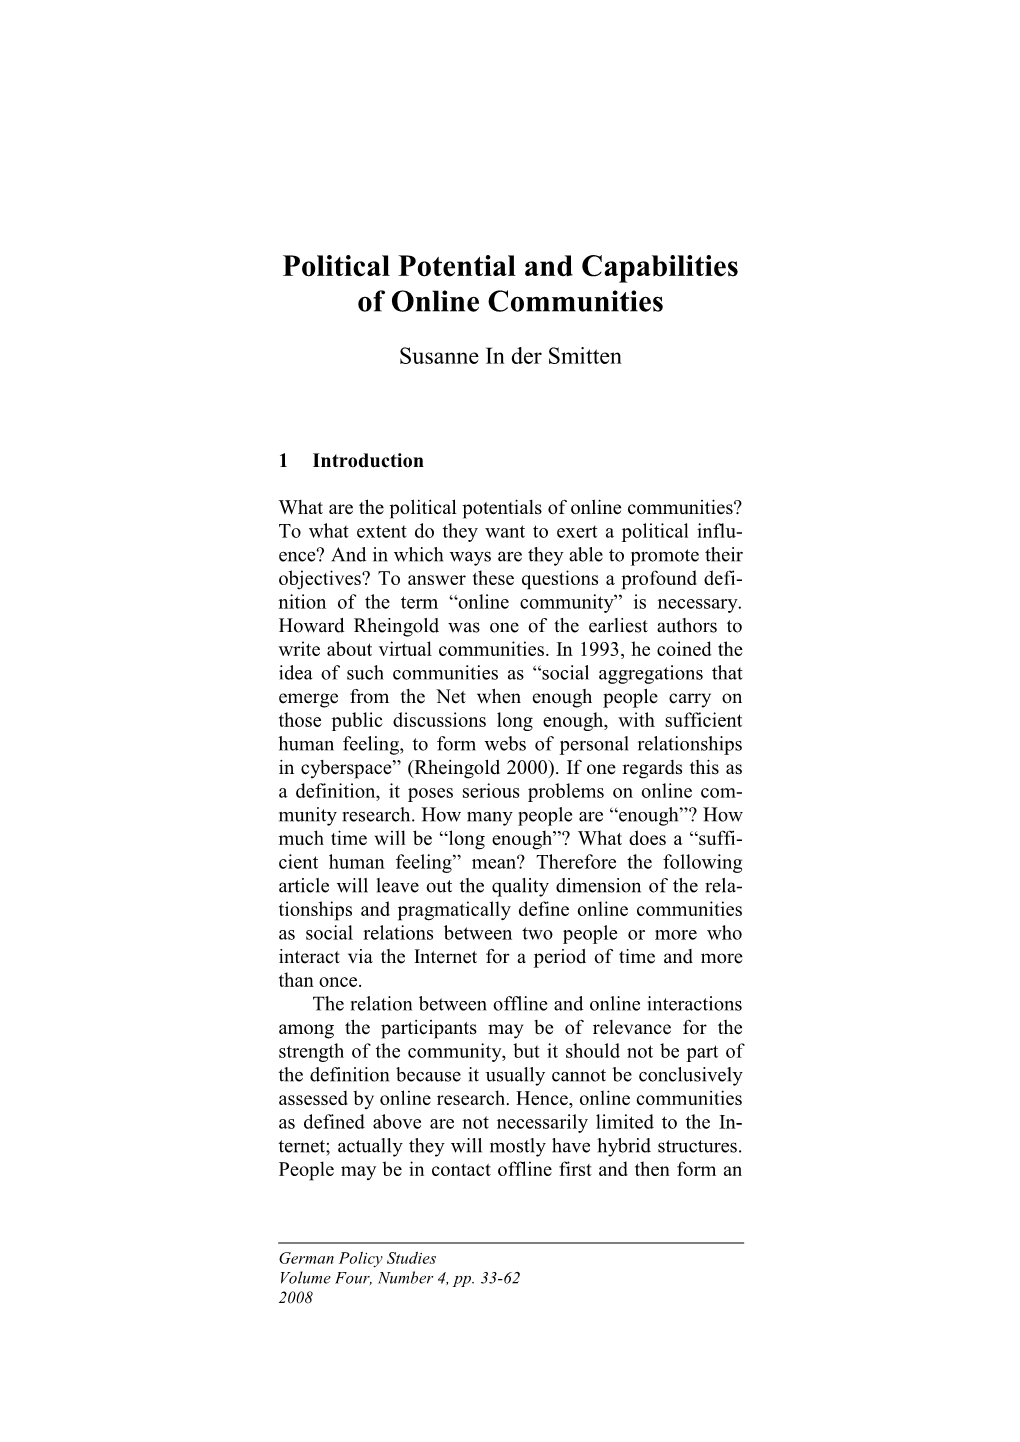 Political Potential and Capabilities of Online Communities